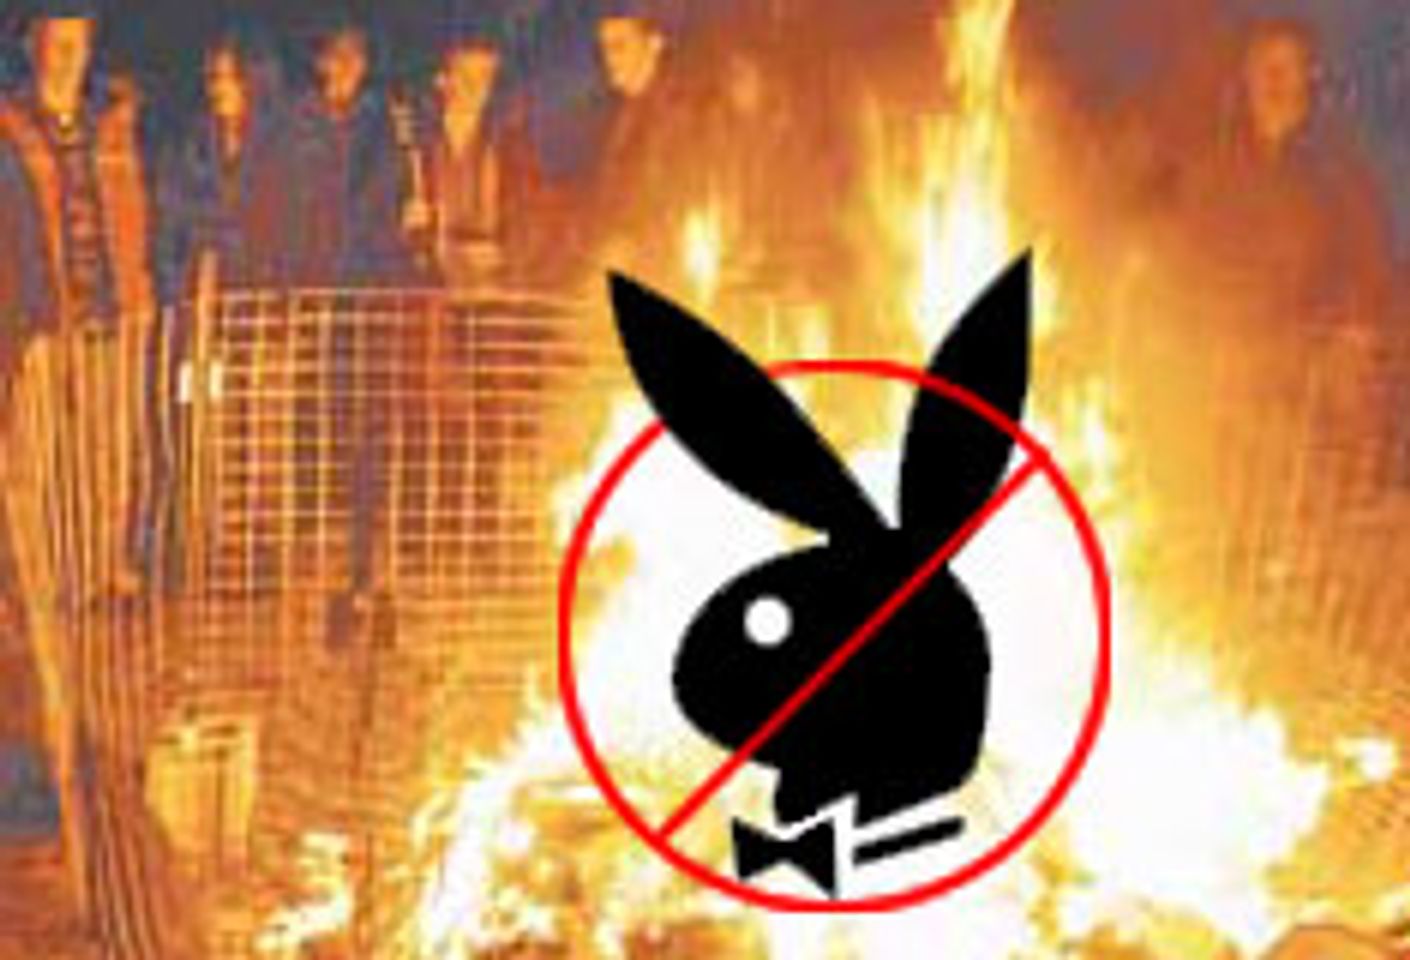 Obscenity Investigation Leads to Removal of <I>Playboy</i> from Alabama Bookstore